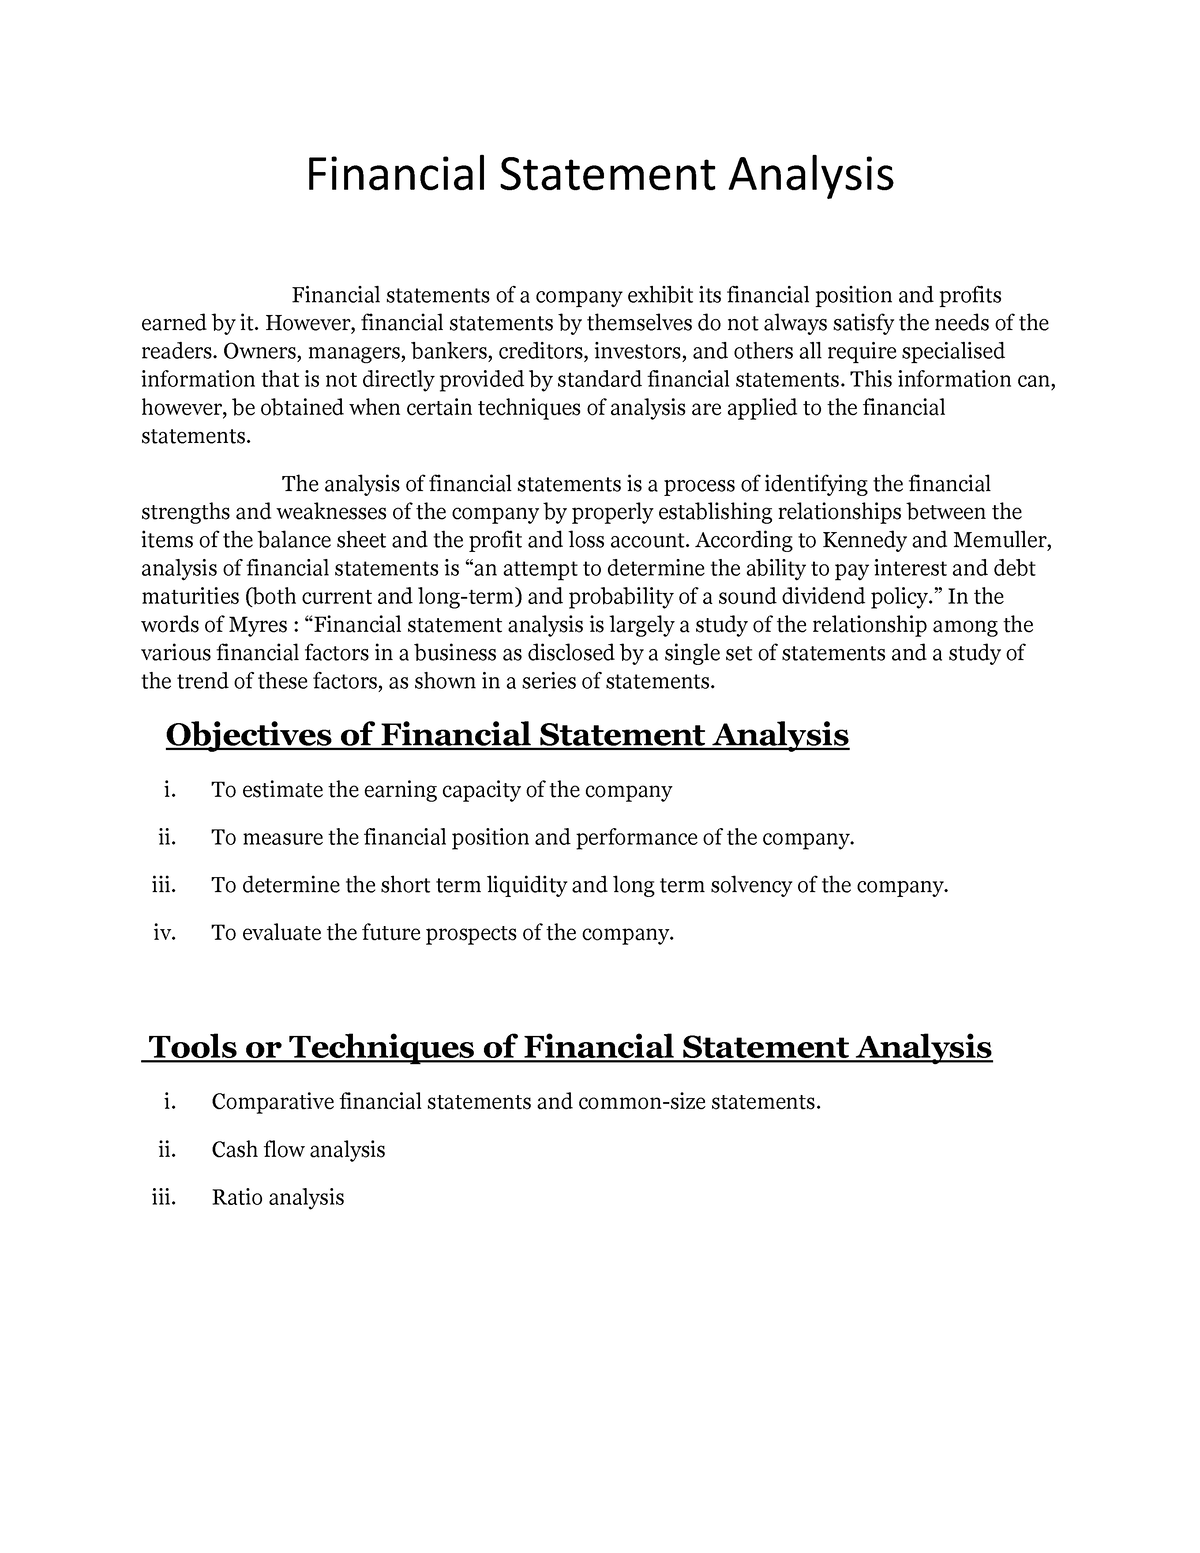 phd thesis on financial statement analysis